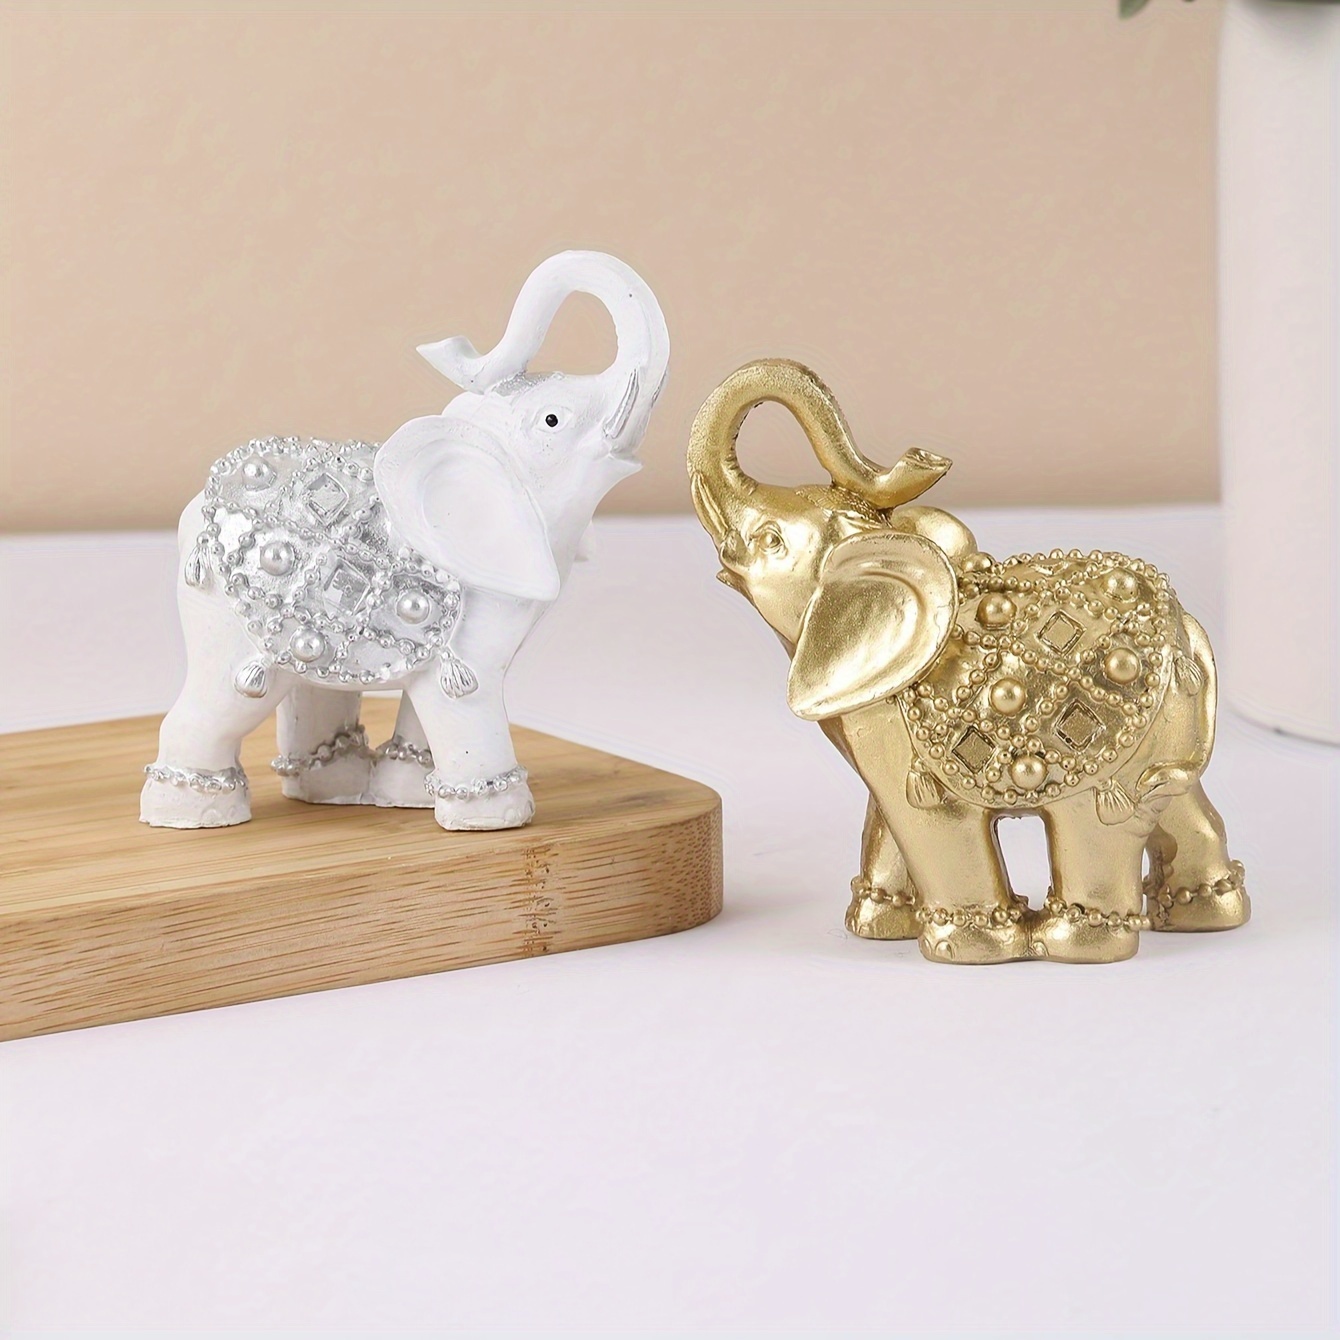 

1pc, European-style Elephant Figurines, Decorative Resin Crafted Ornaments, White And Golden With Bejeweled Accents, Elegant Home Decor Items